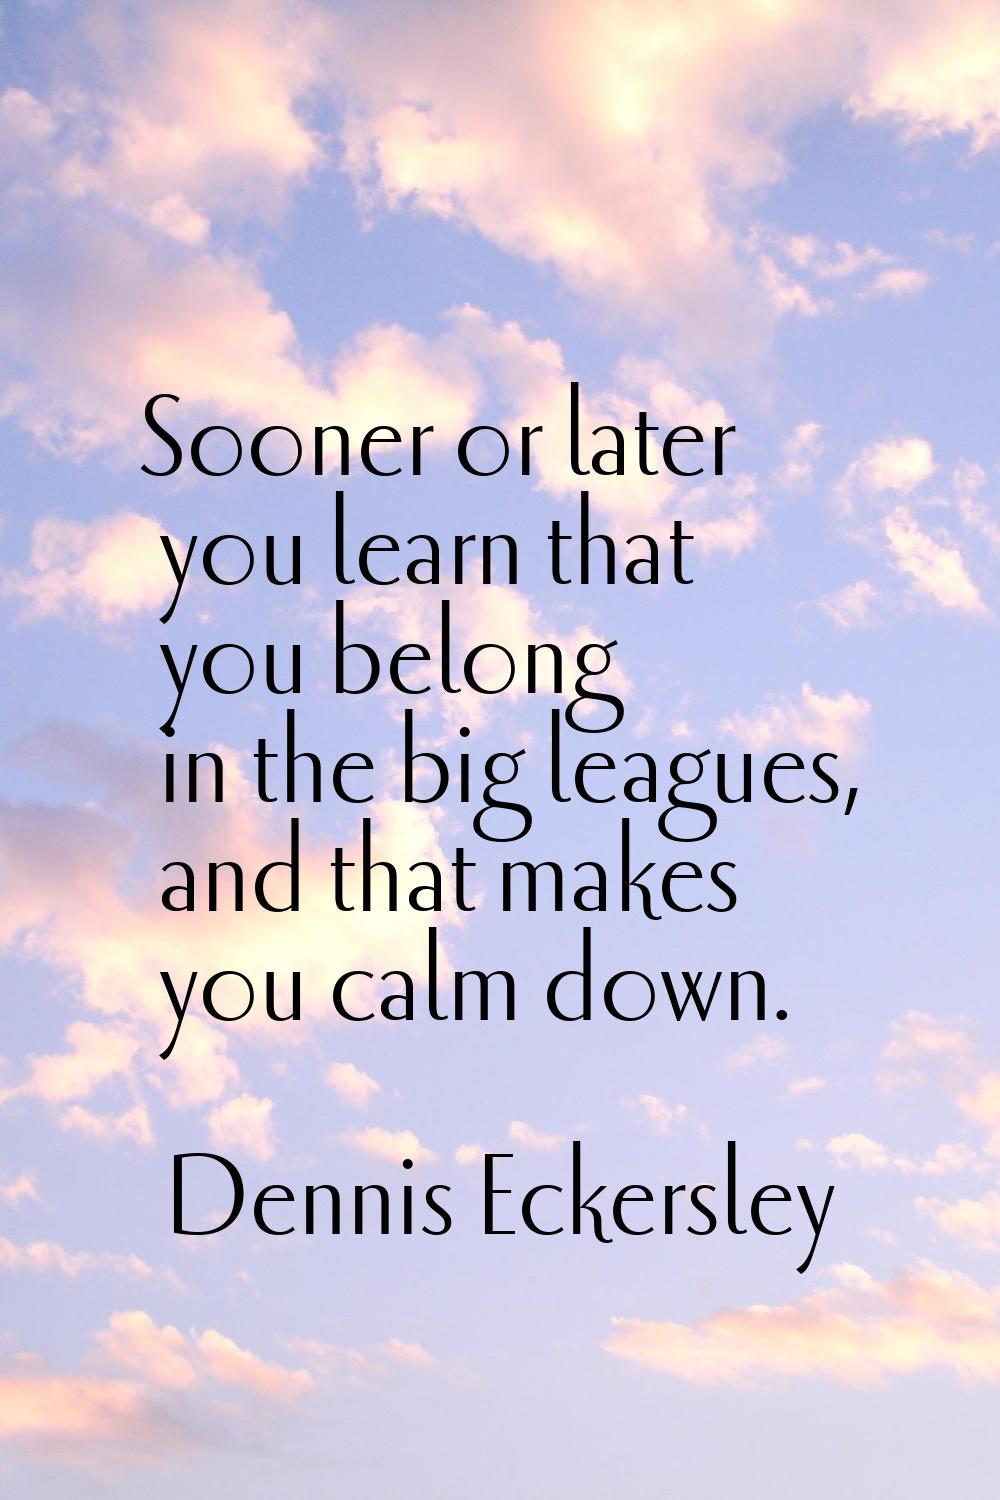 Sooner or later you learn that you belong in the big leagues, and that makes you calm down.